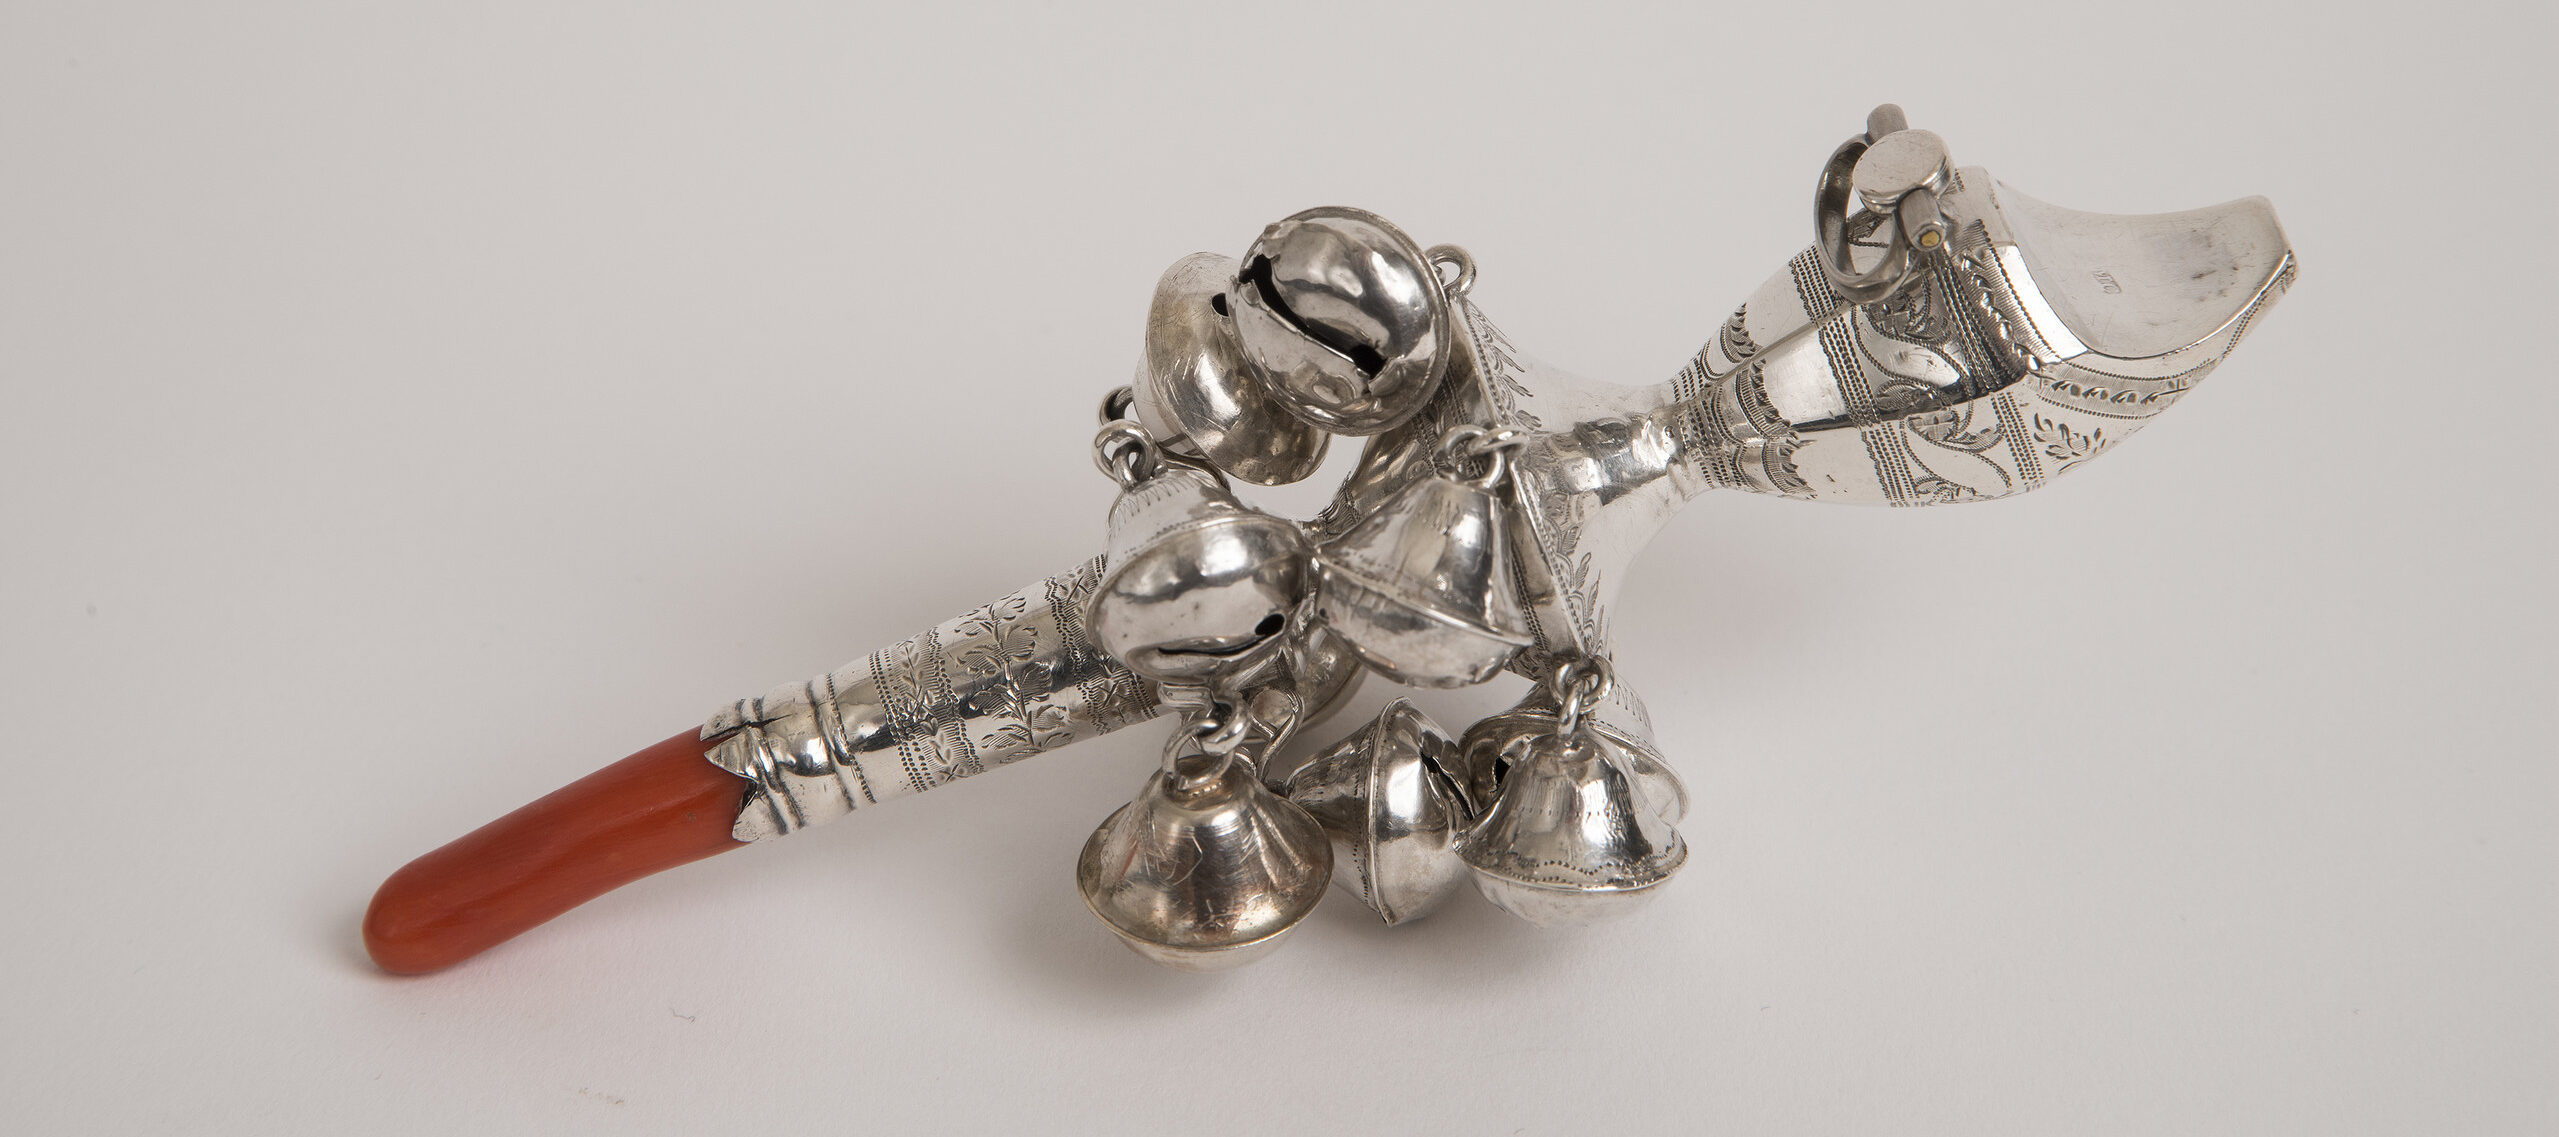 Mary Ann Croswell, George III child's rattle, 1808; Silver with coral, 5 3/8 in.; National Museum of Women in the Arts, Silver collection assembled by Nancy Valentine, purchased with funds donated by Mr. and Mrs. Oliver R. Grace and family; Photo by Lee Stalsworth